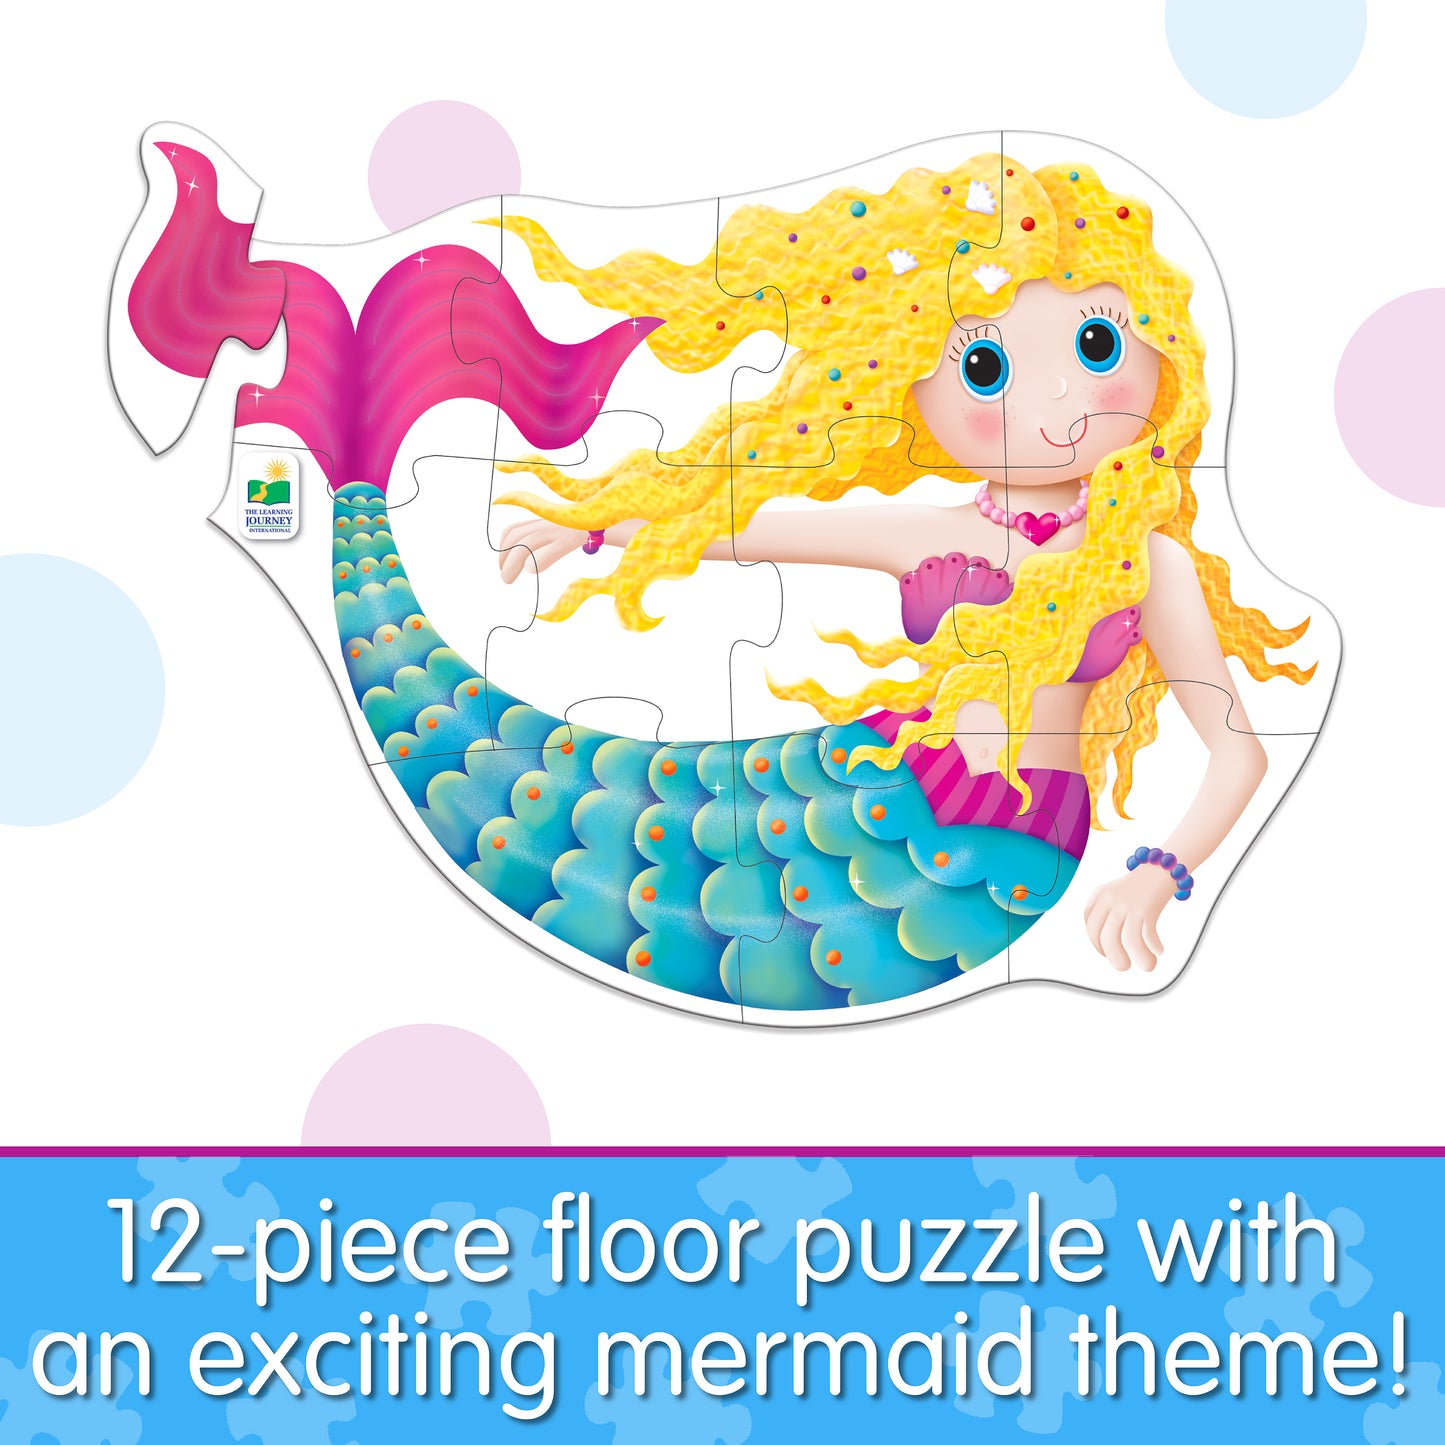 Infographic about My First Big Puzzle - Mermaid that says, "12-piece floor puzzle with an exciting mermaid theme!"